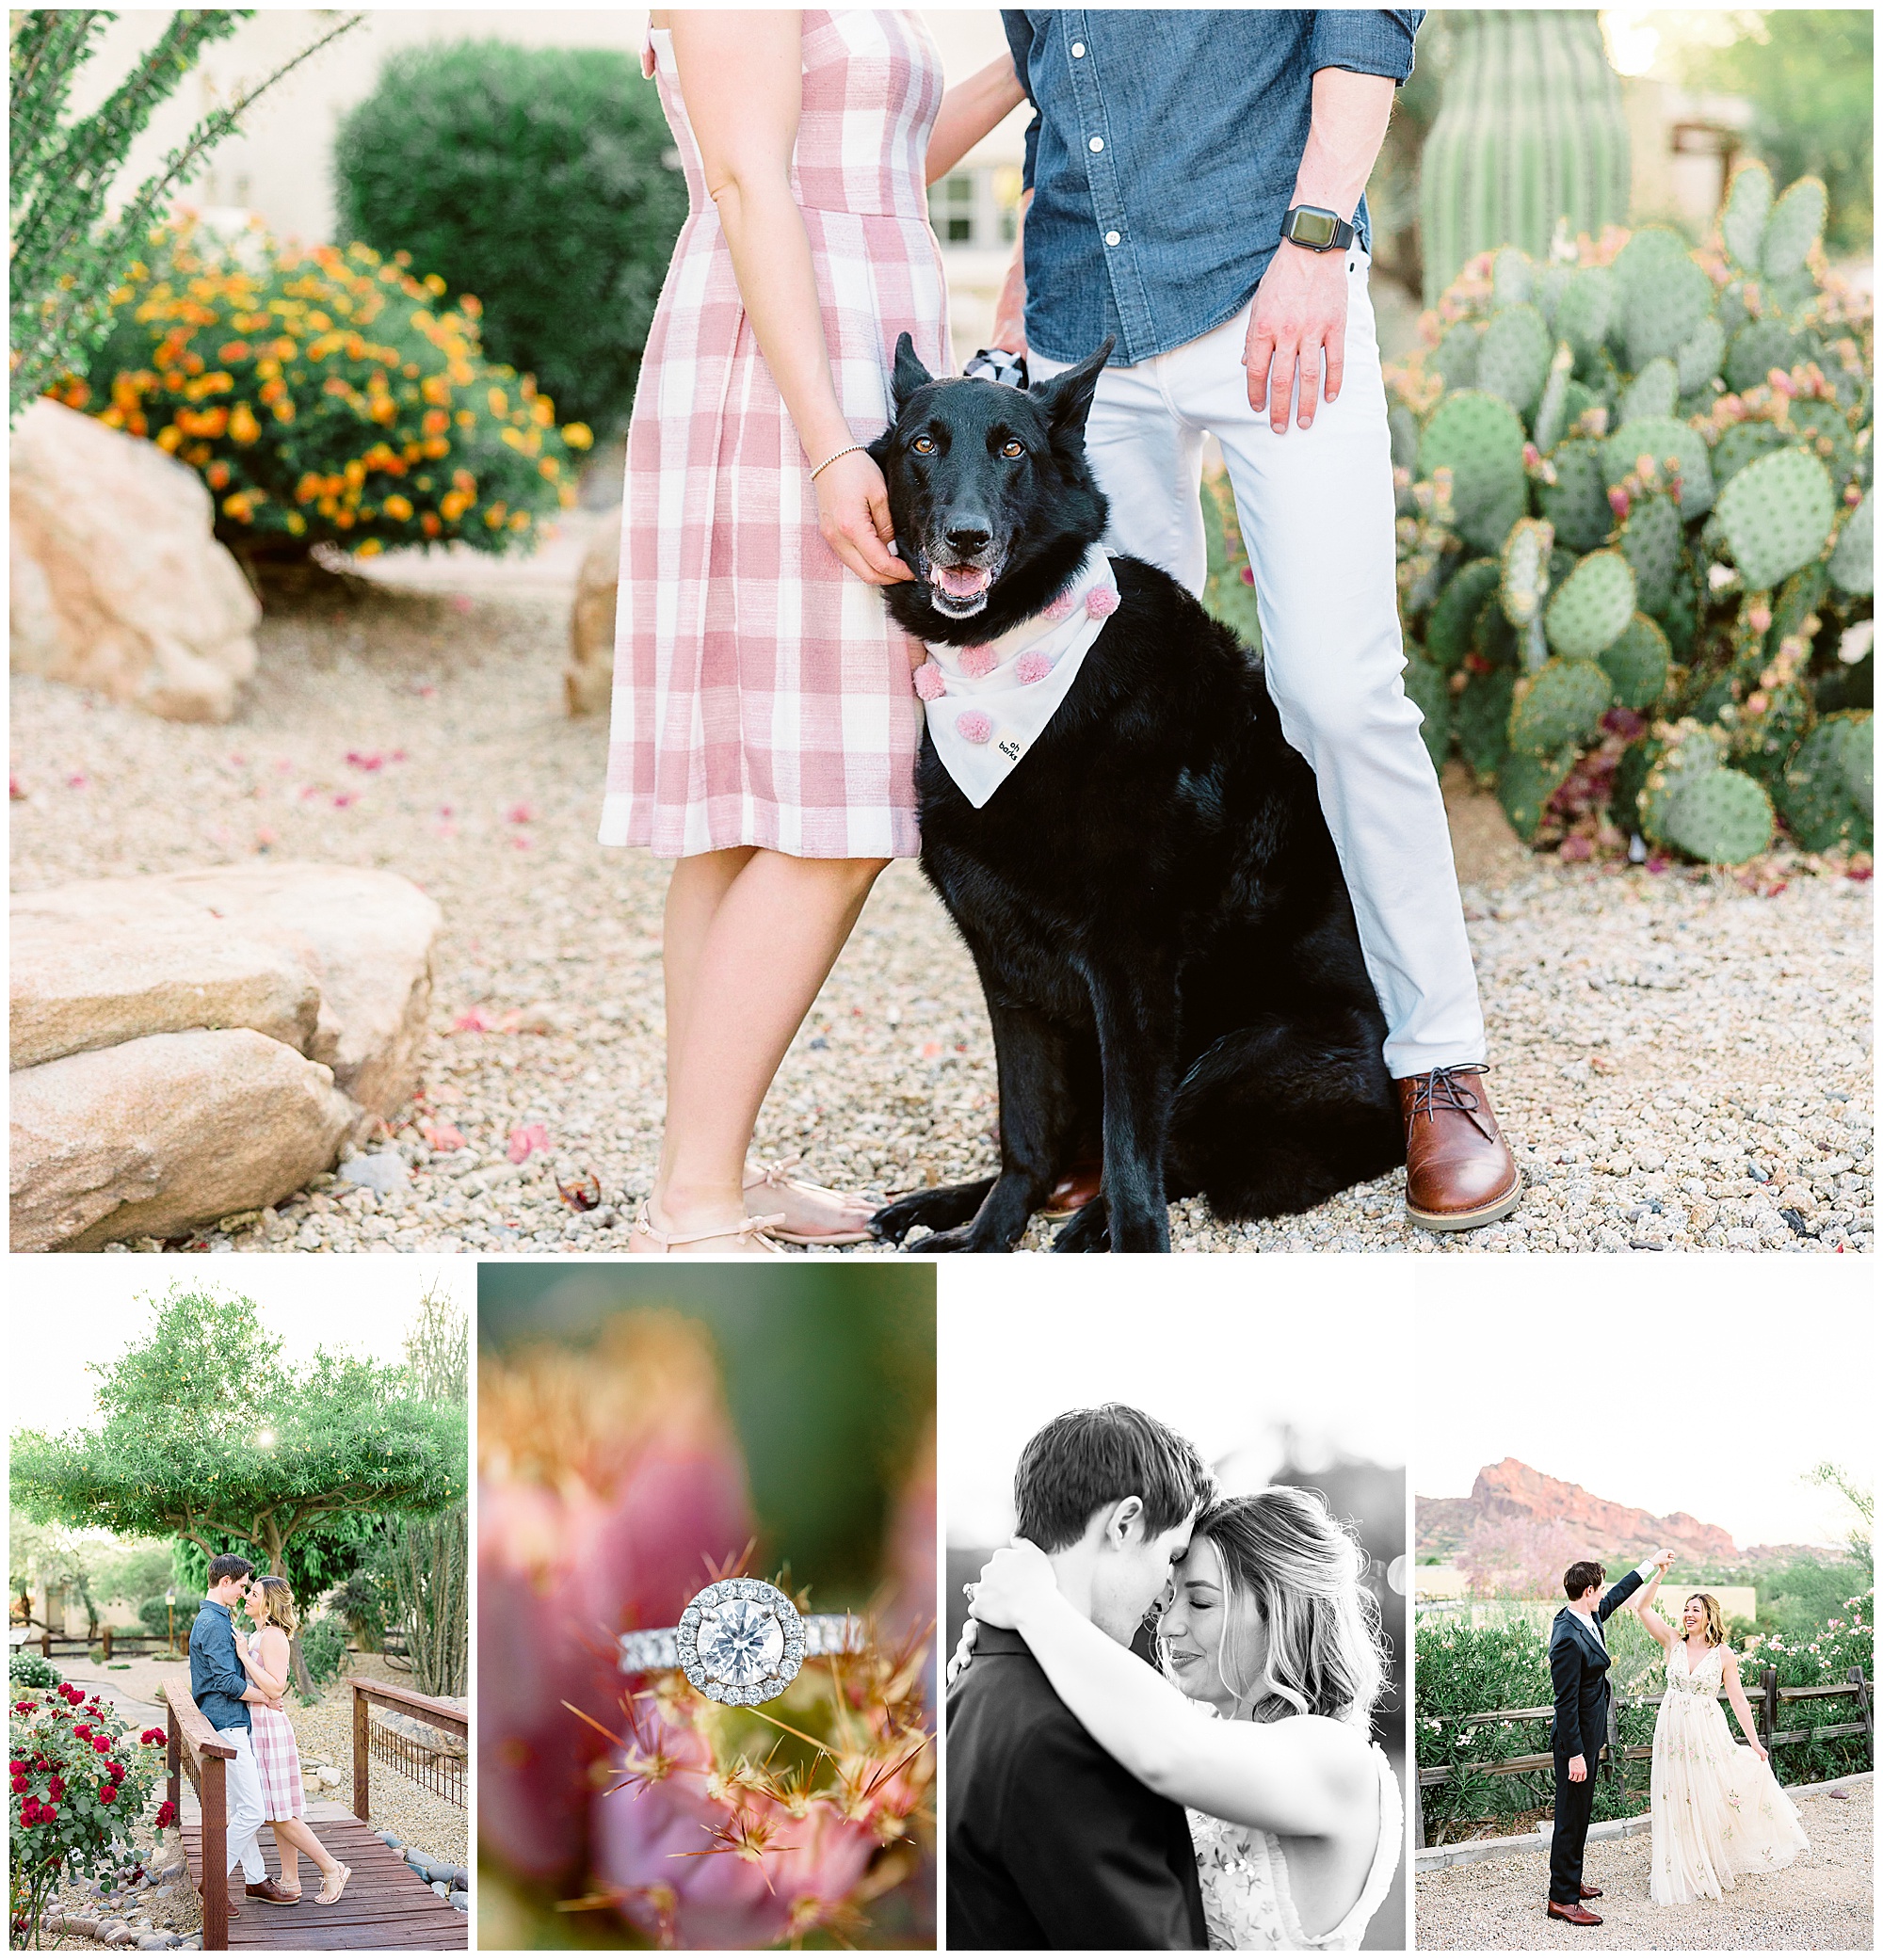 Engagement Photos at camelback Inn IN scottsdale with their dog